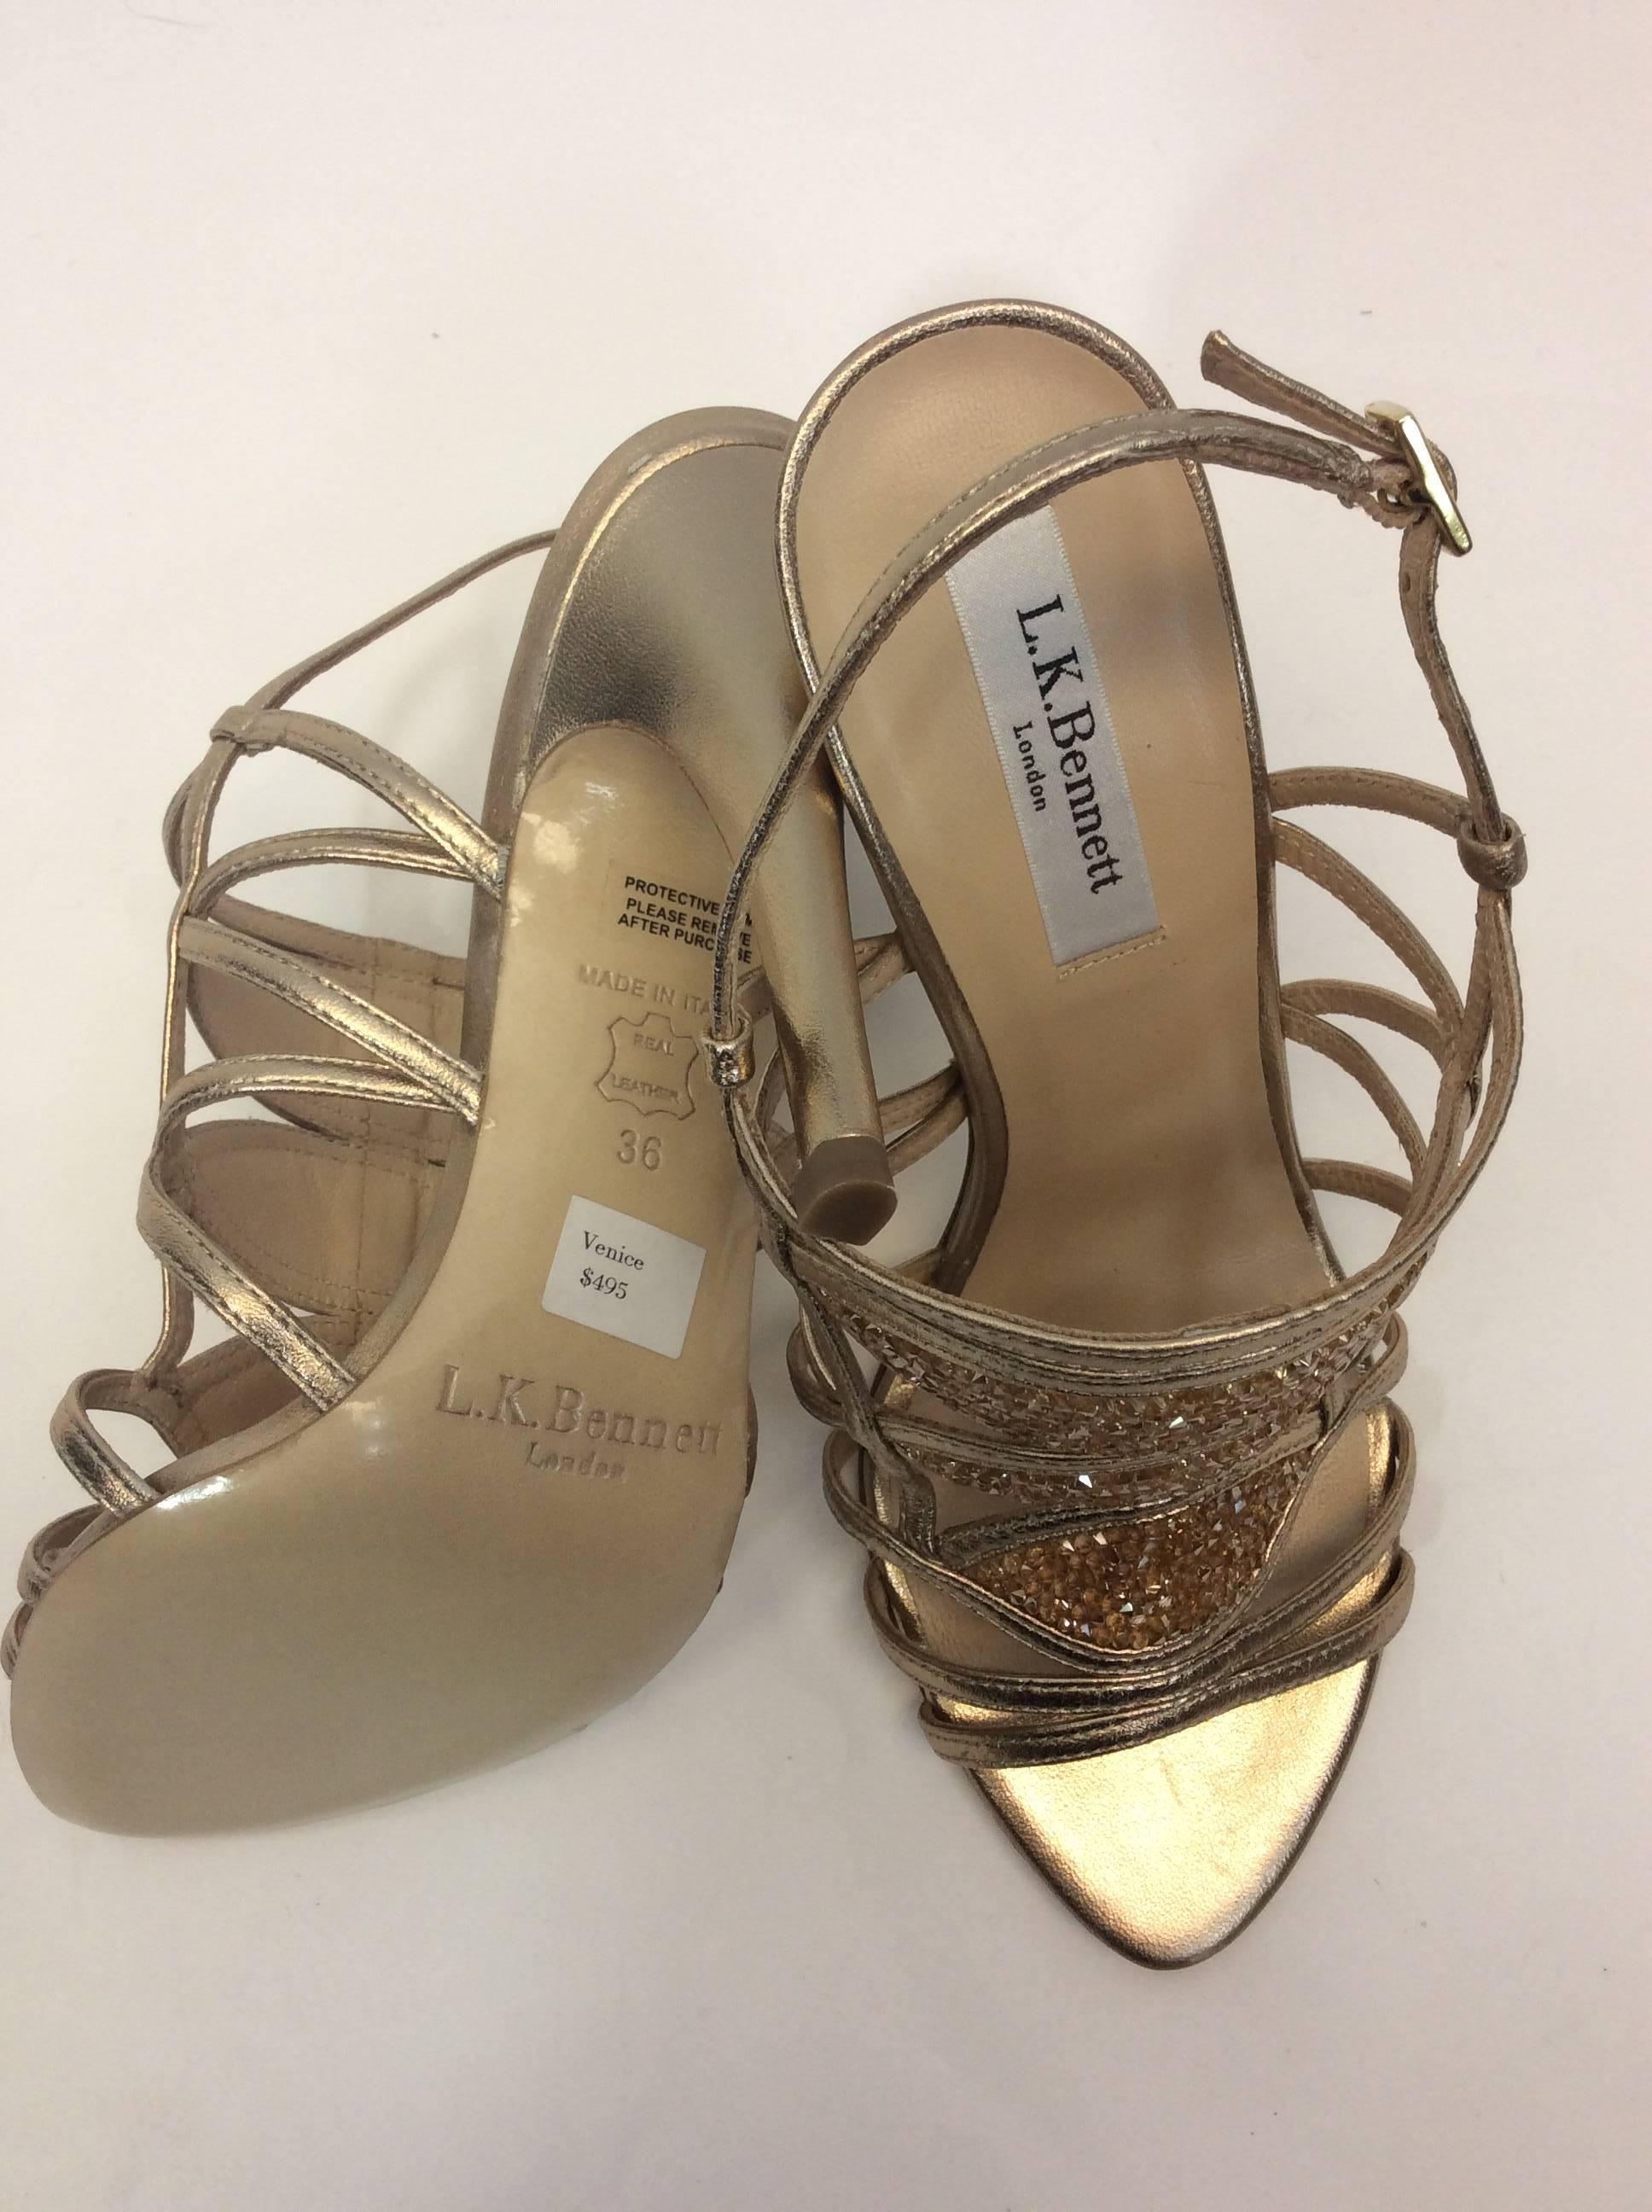 Gold Beaded Sandal
4.5 inch heel
3.25 inch sole width
Buckle closure on ankle
Metallic leather texture with beaded sections
Size 36 (equates to US 5.5)
Leather sole, upper and lining